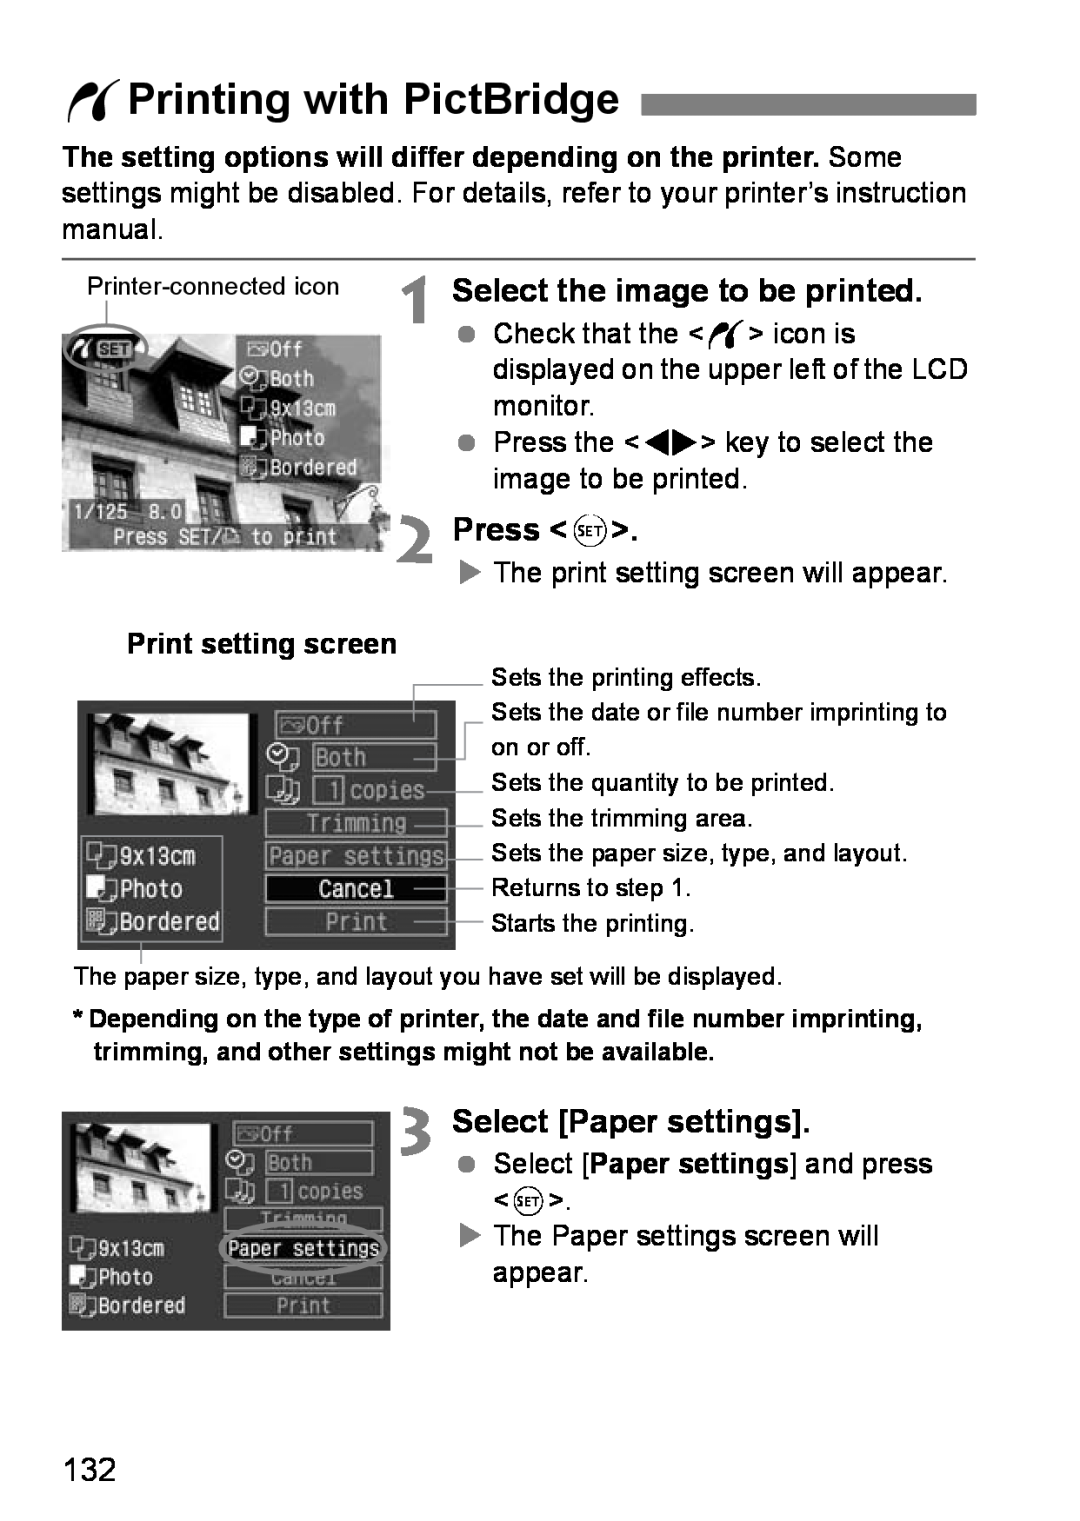 Canon EOS DIGITAL REBEL XTI wPrinting with PictBridge, Select the image to be printed, Select Paper settings, Press 